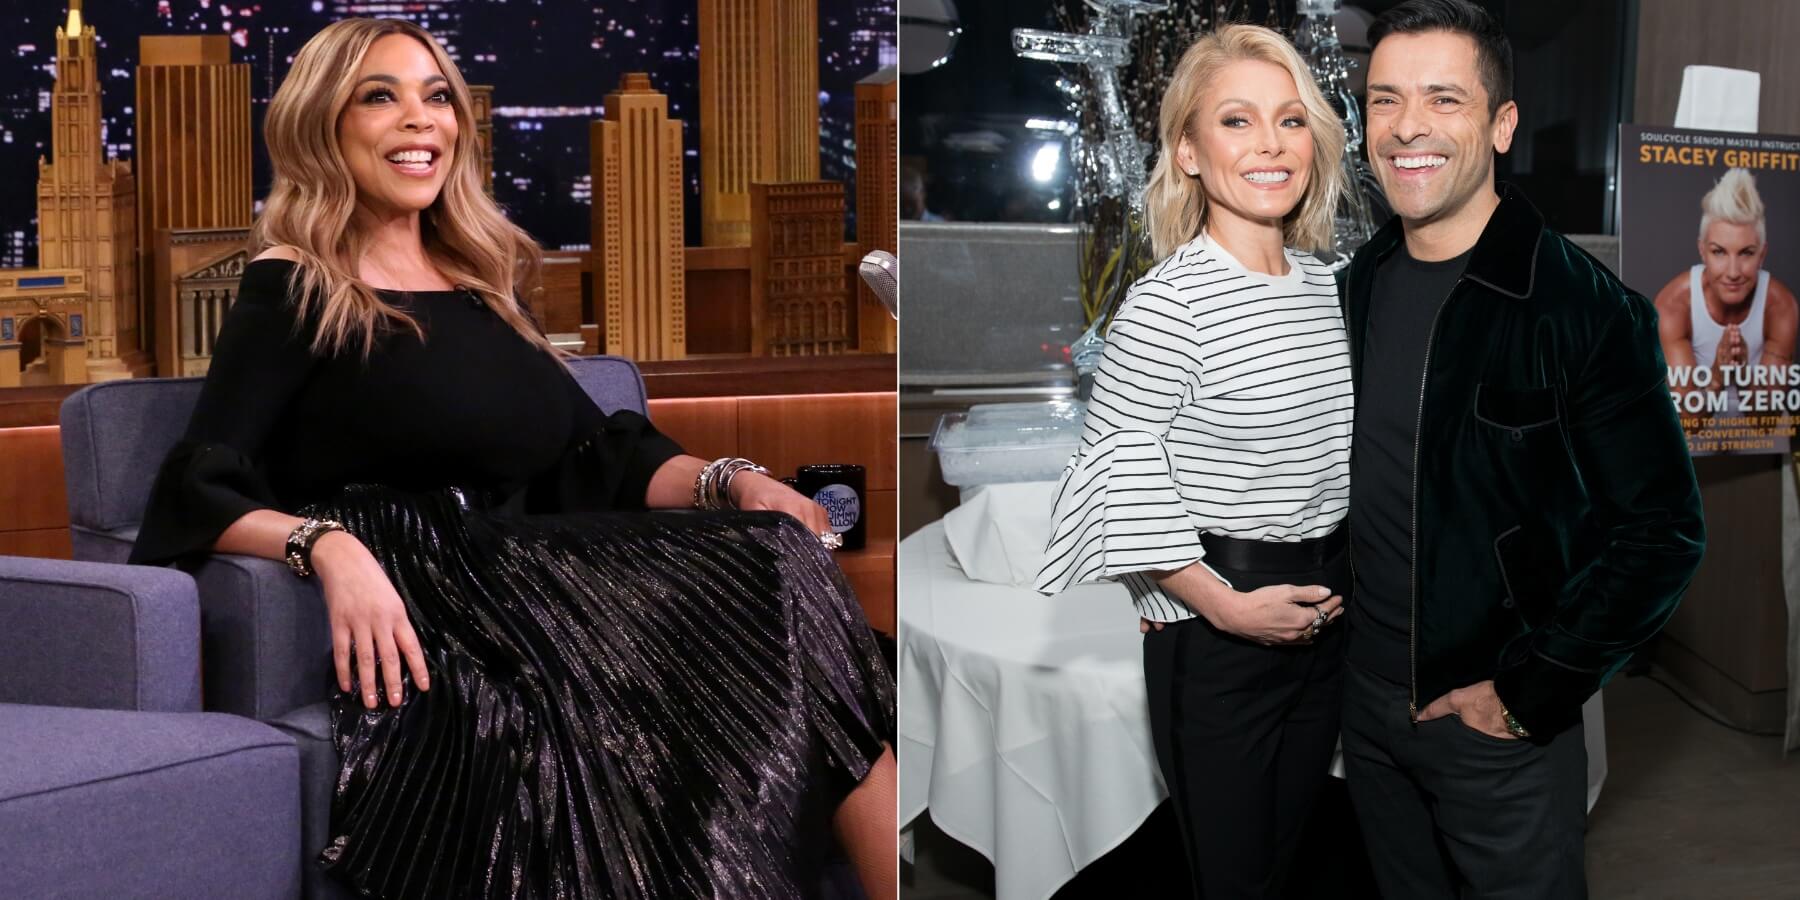 Wendy Williams in a side-by-side photo with Kelly Ripa and Mark Consuelos